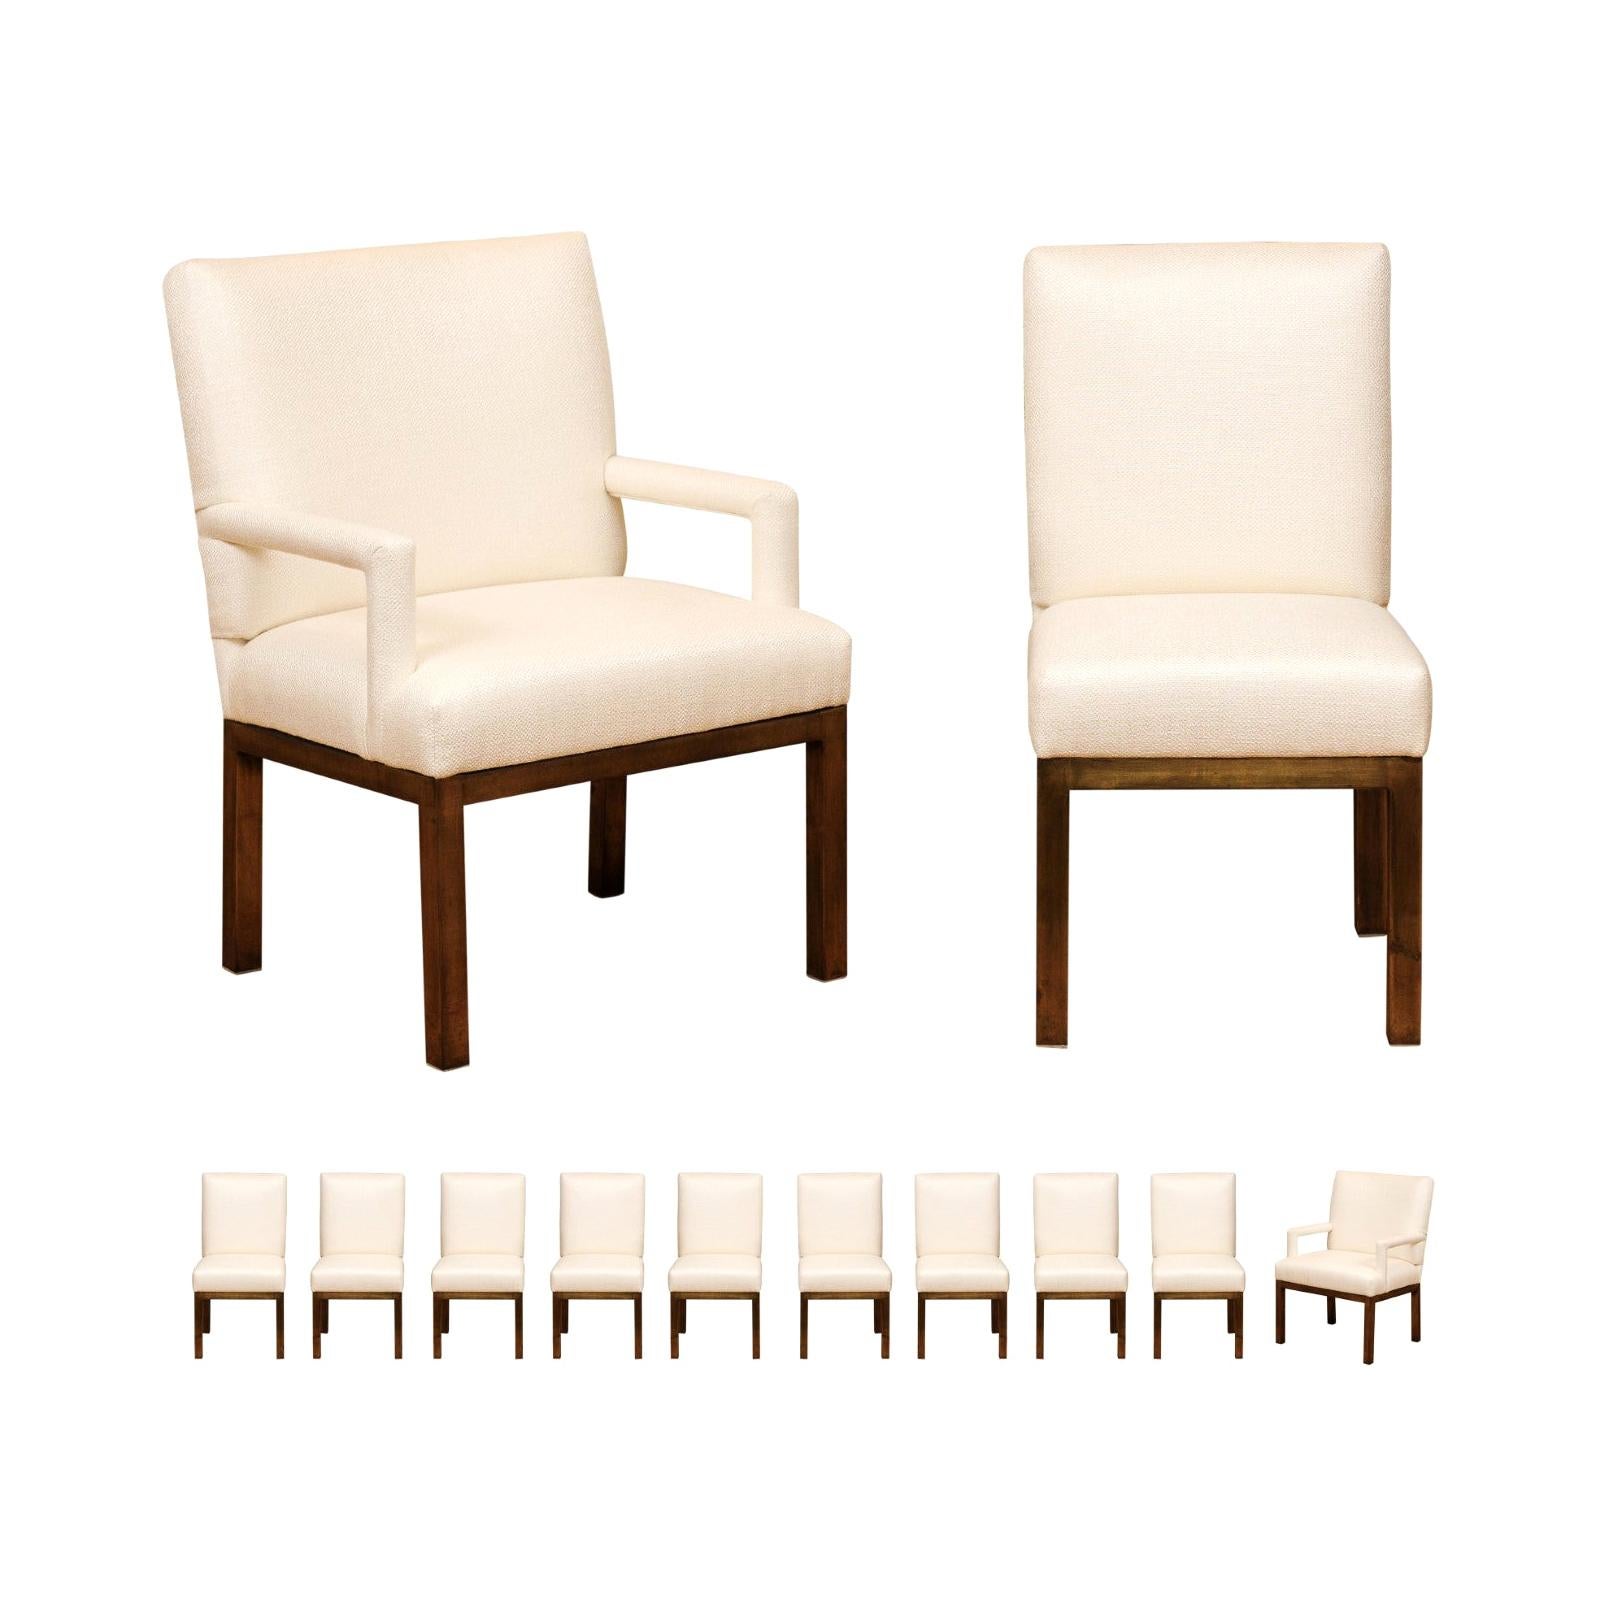 Chic Restored Set of 12 Brass Parsons Dining Chairs by John Stuart, circa 1968